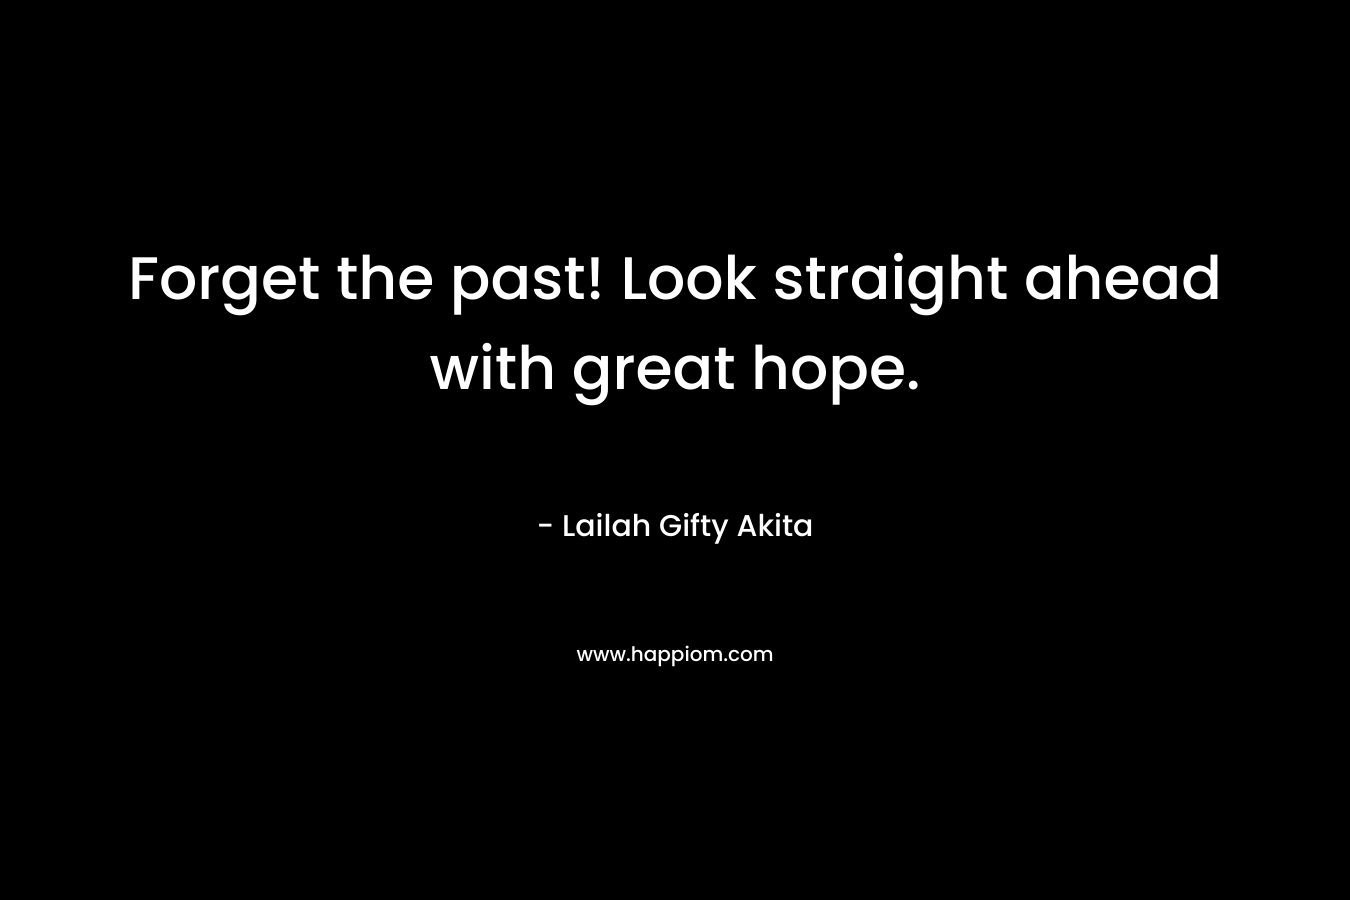 Forget the past! Look straight ahead with great hope.